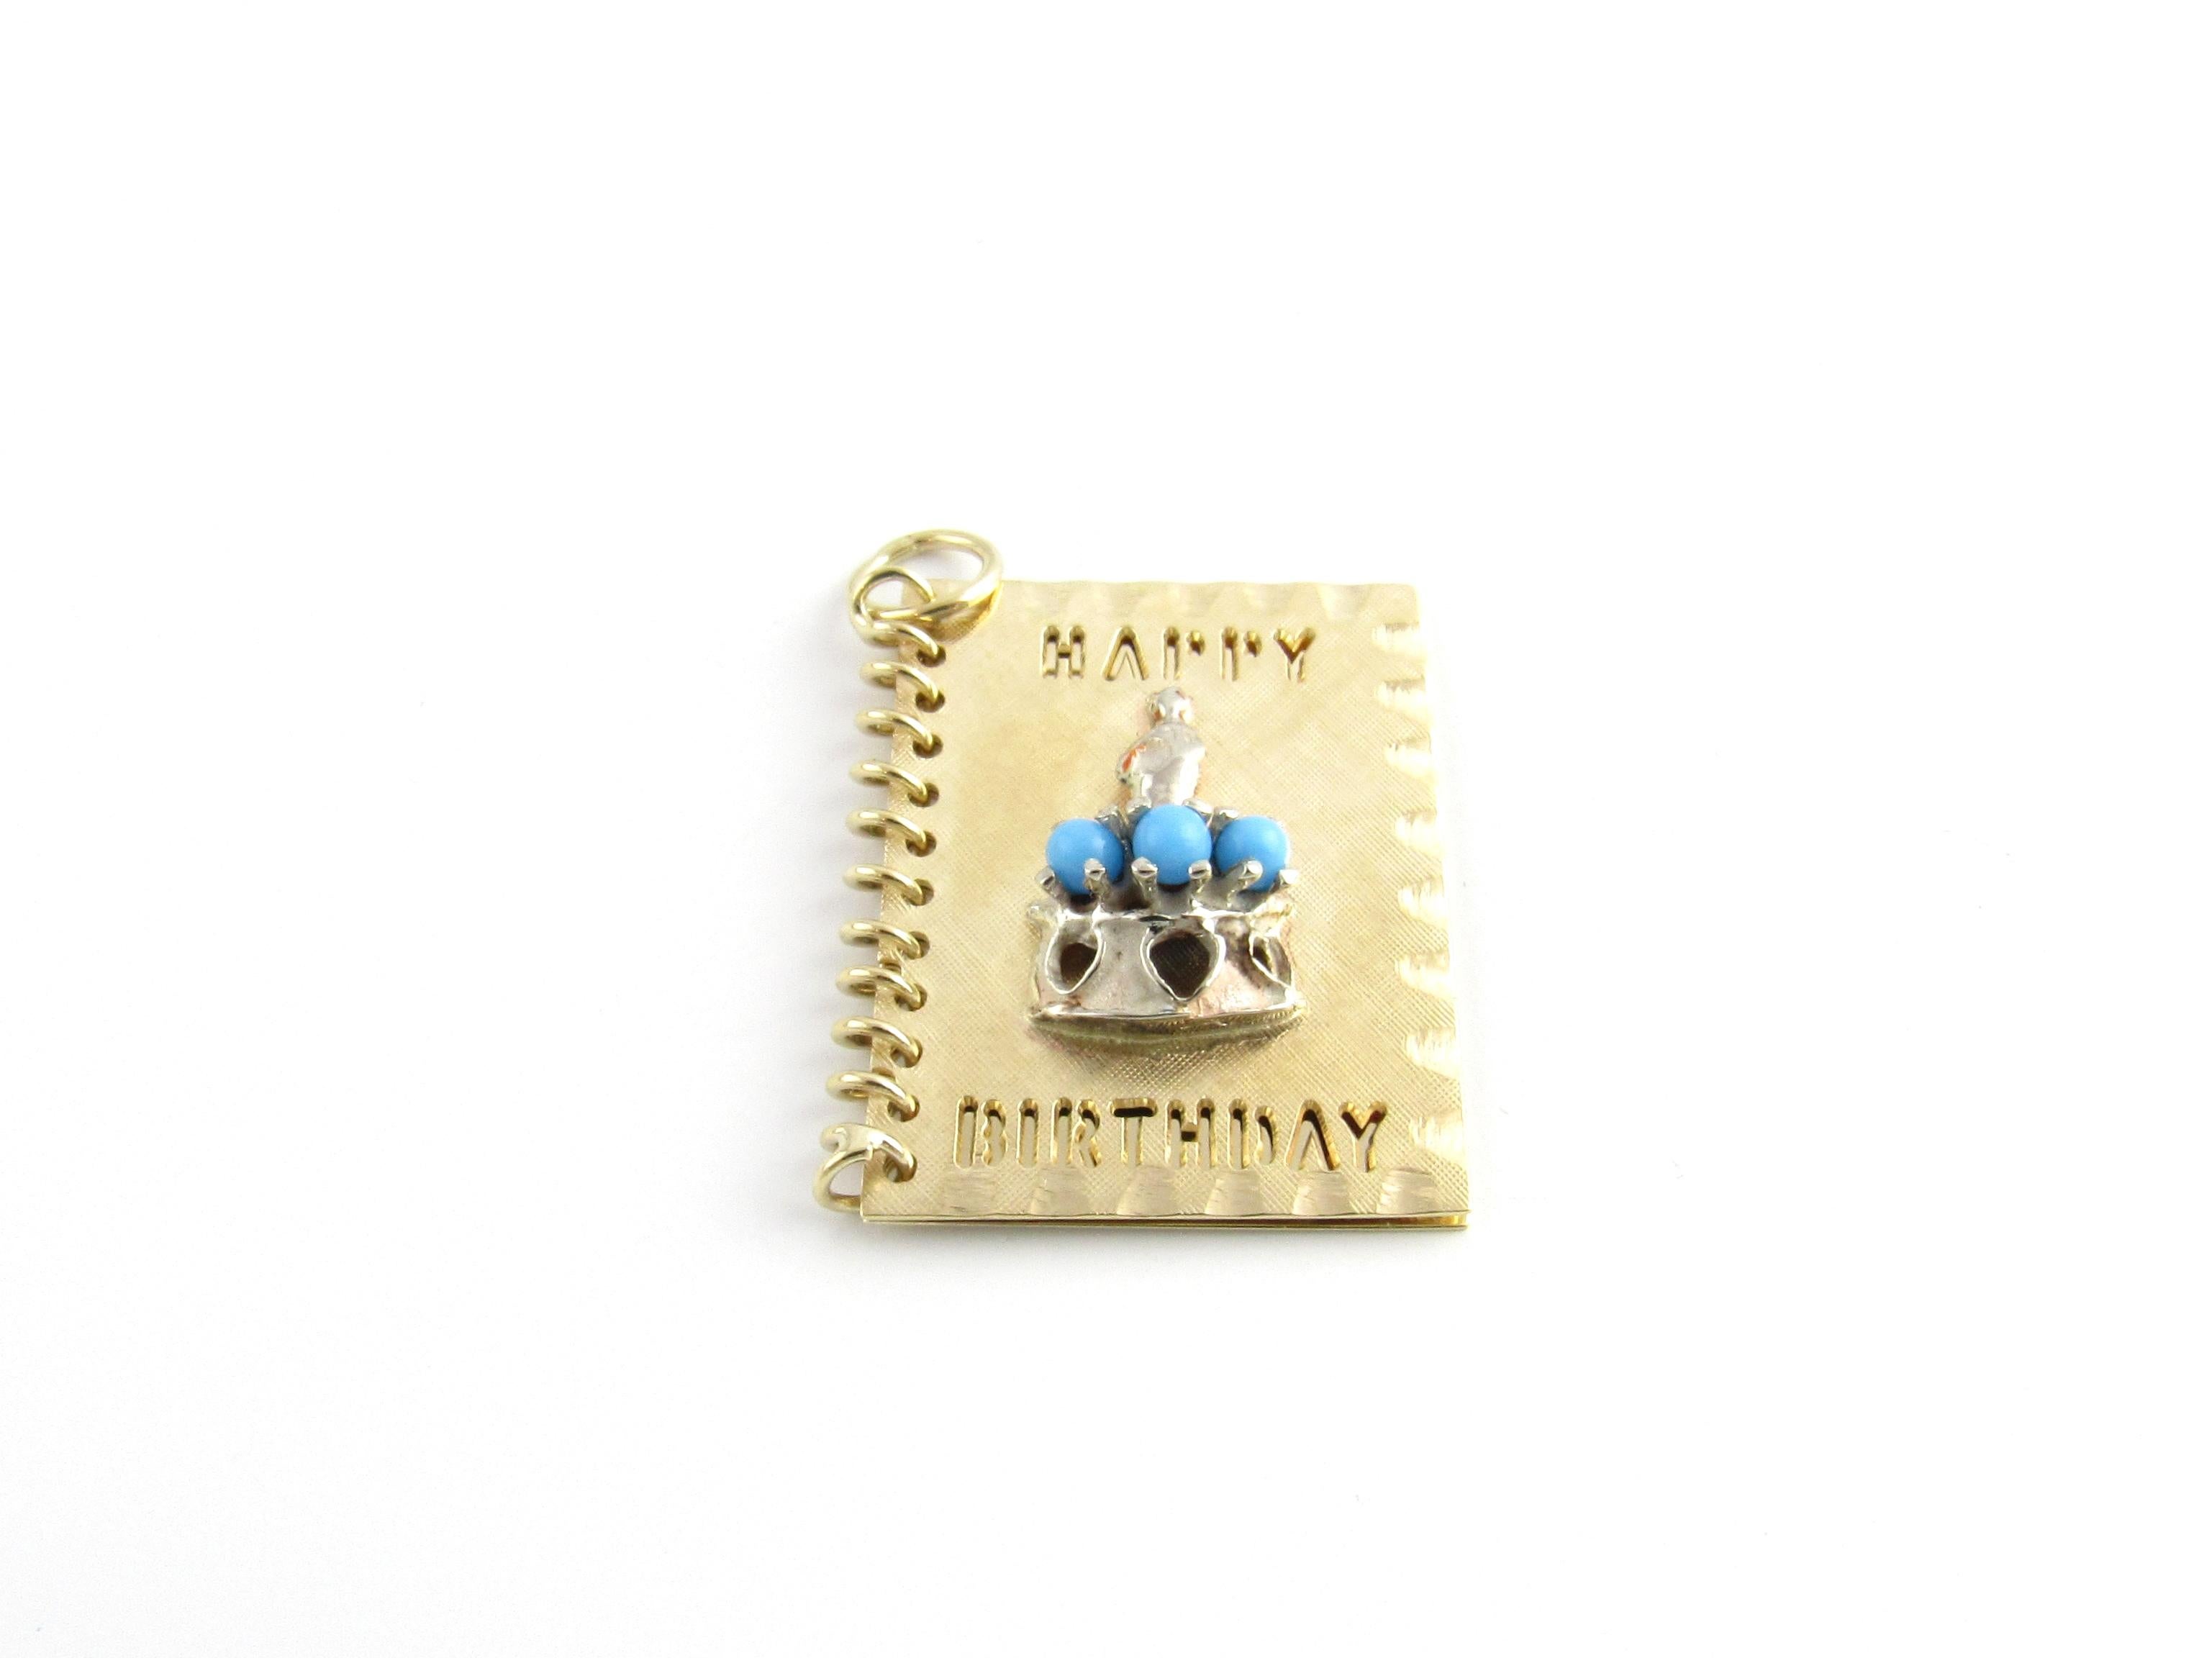 Vintage 14 Karat Yellow Gold Birthday Card Charm

The ultimate birthday card!

This lovely 3D charm features a hinged greeting card that has 